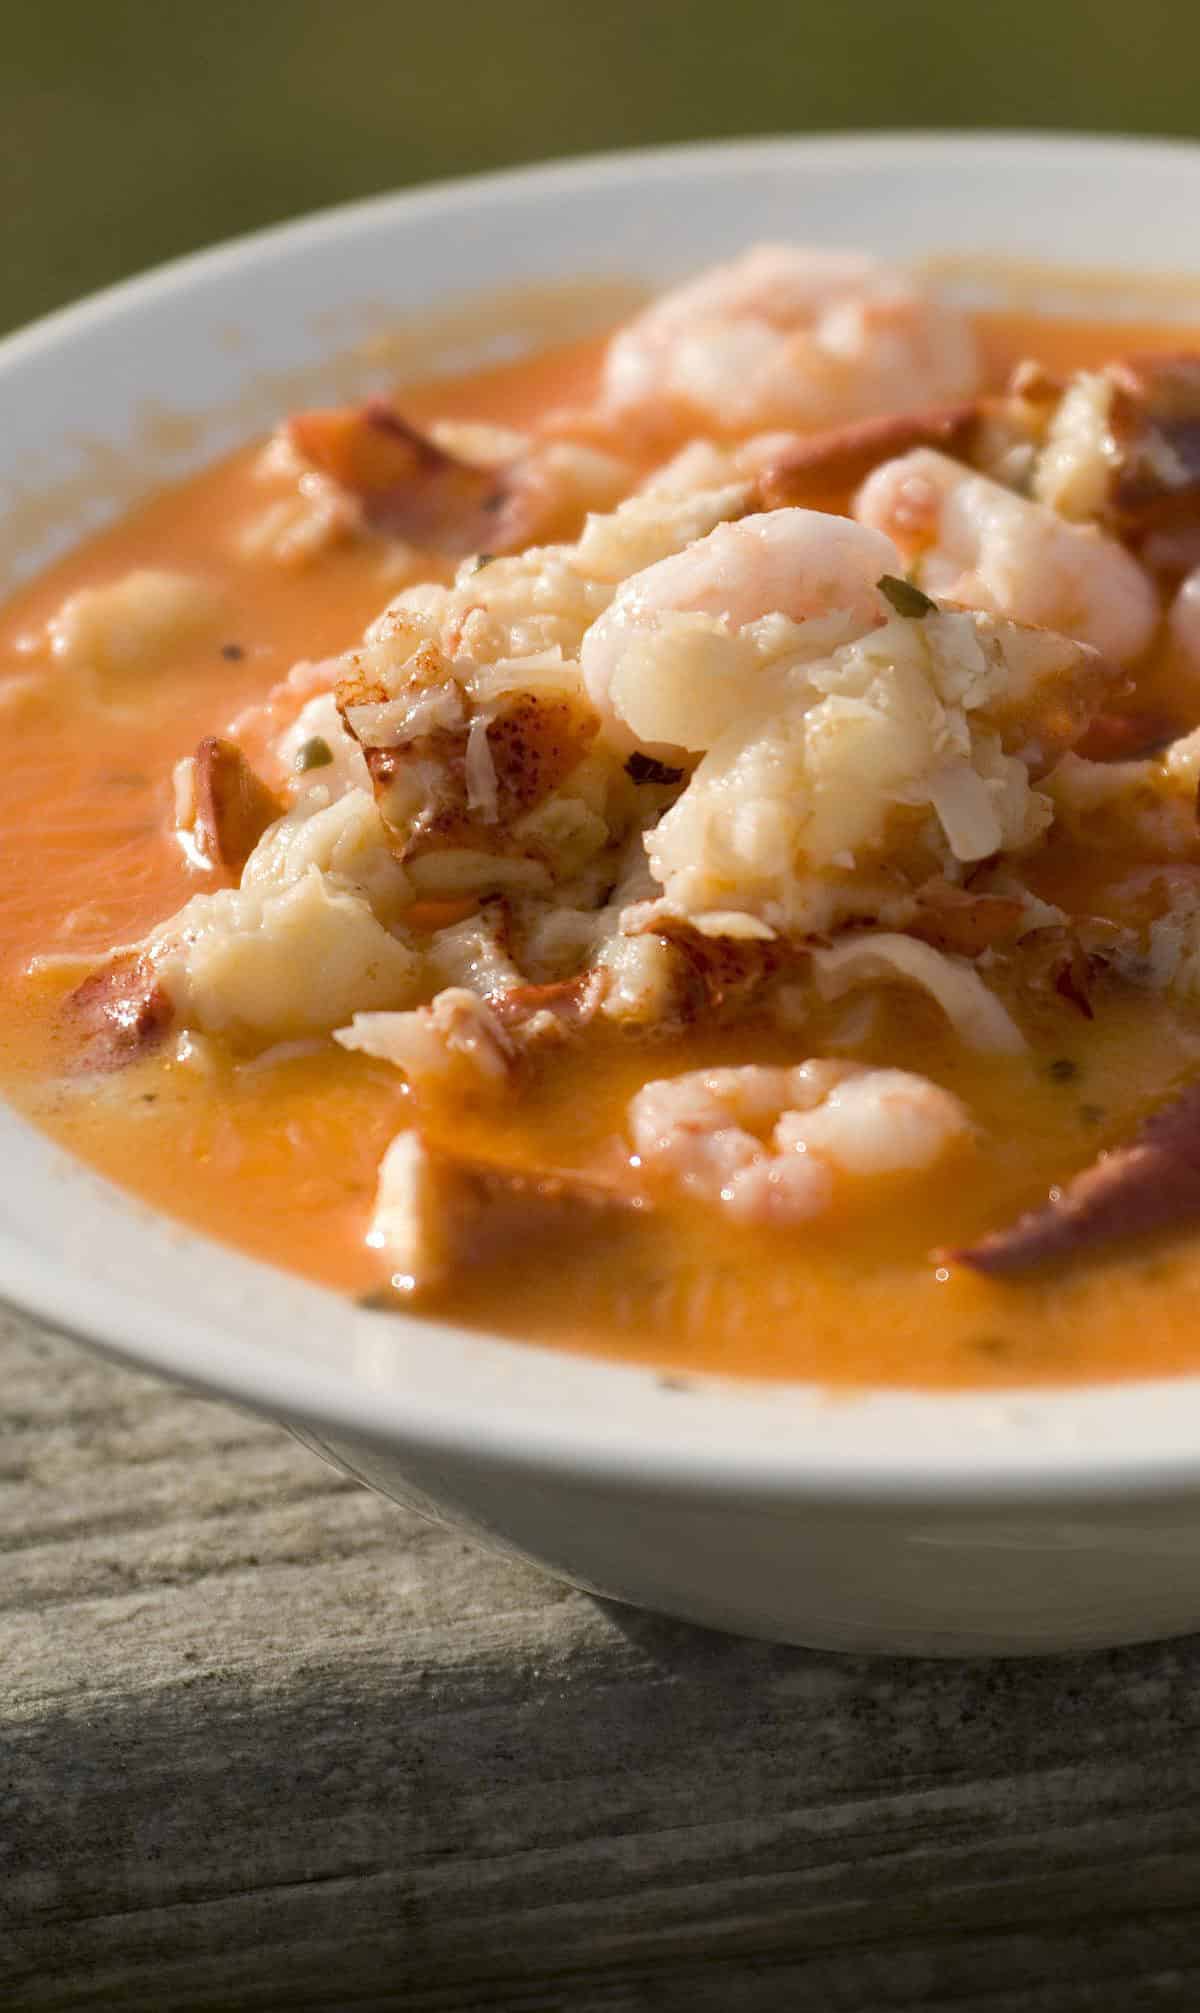  A seafood lover's delight, packed with the distinct and delightful flavor of lobster.